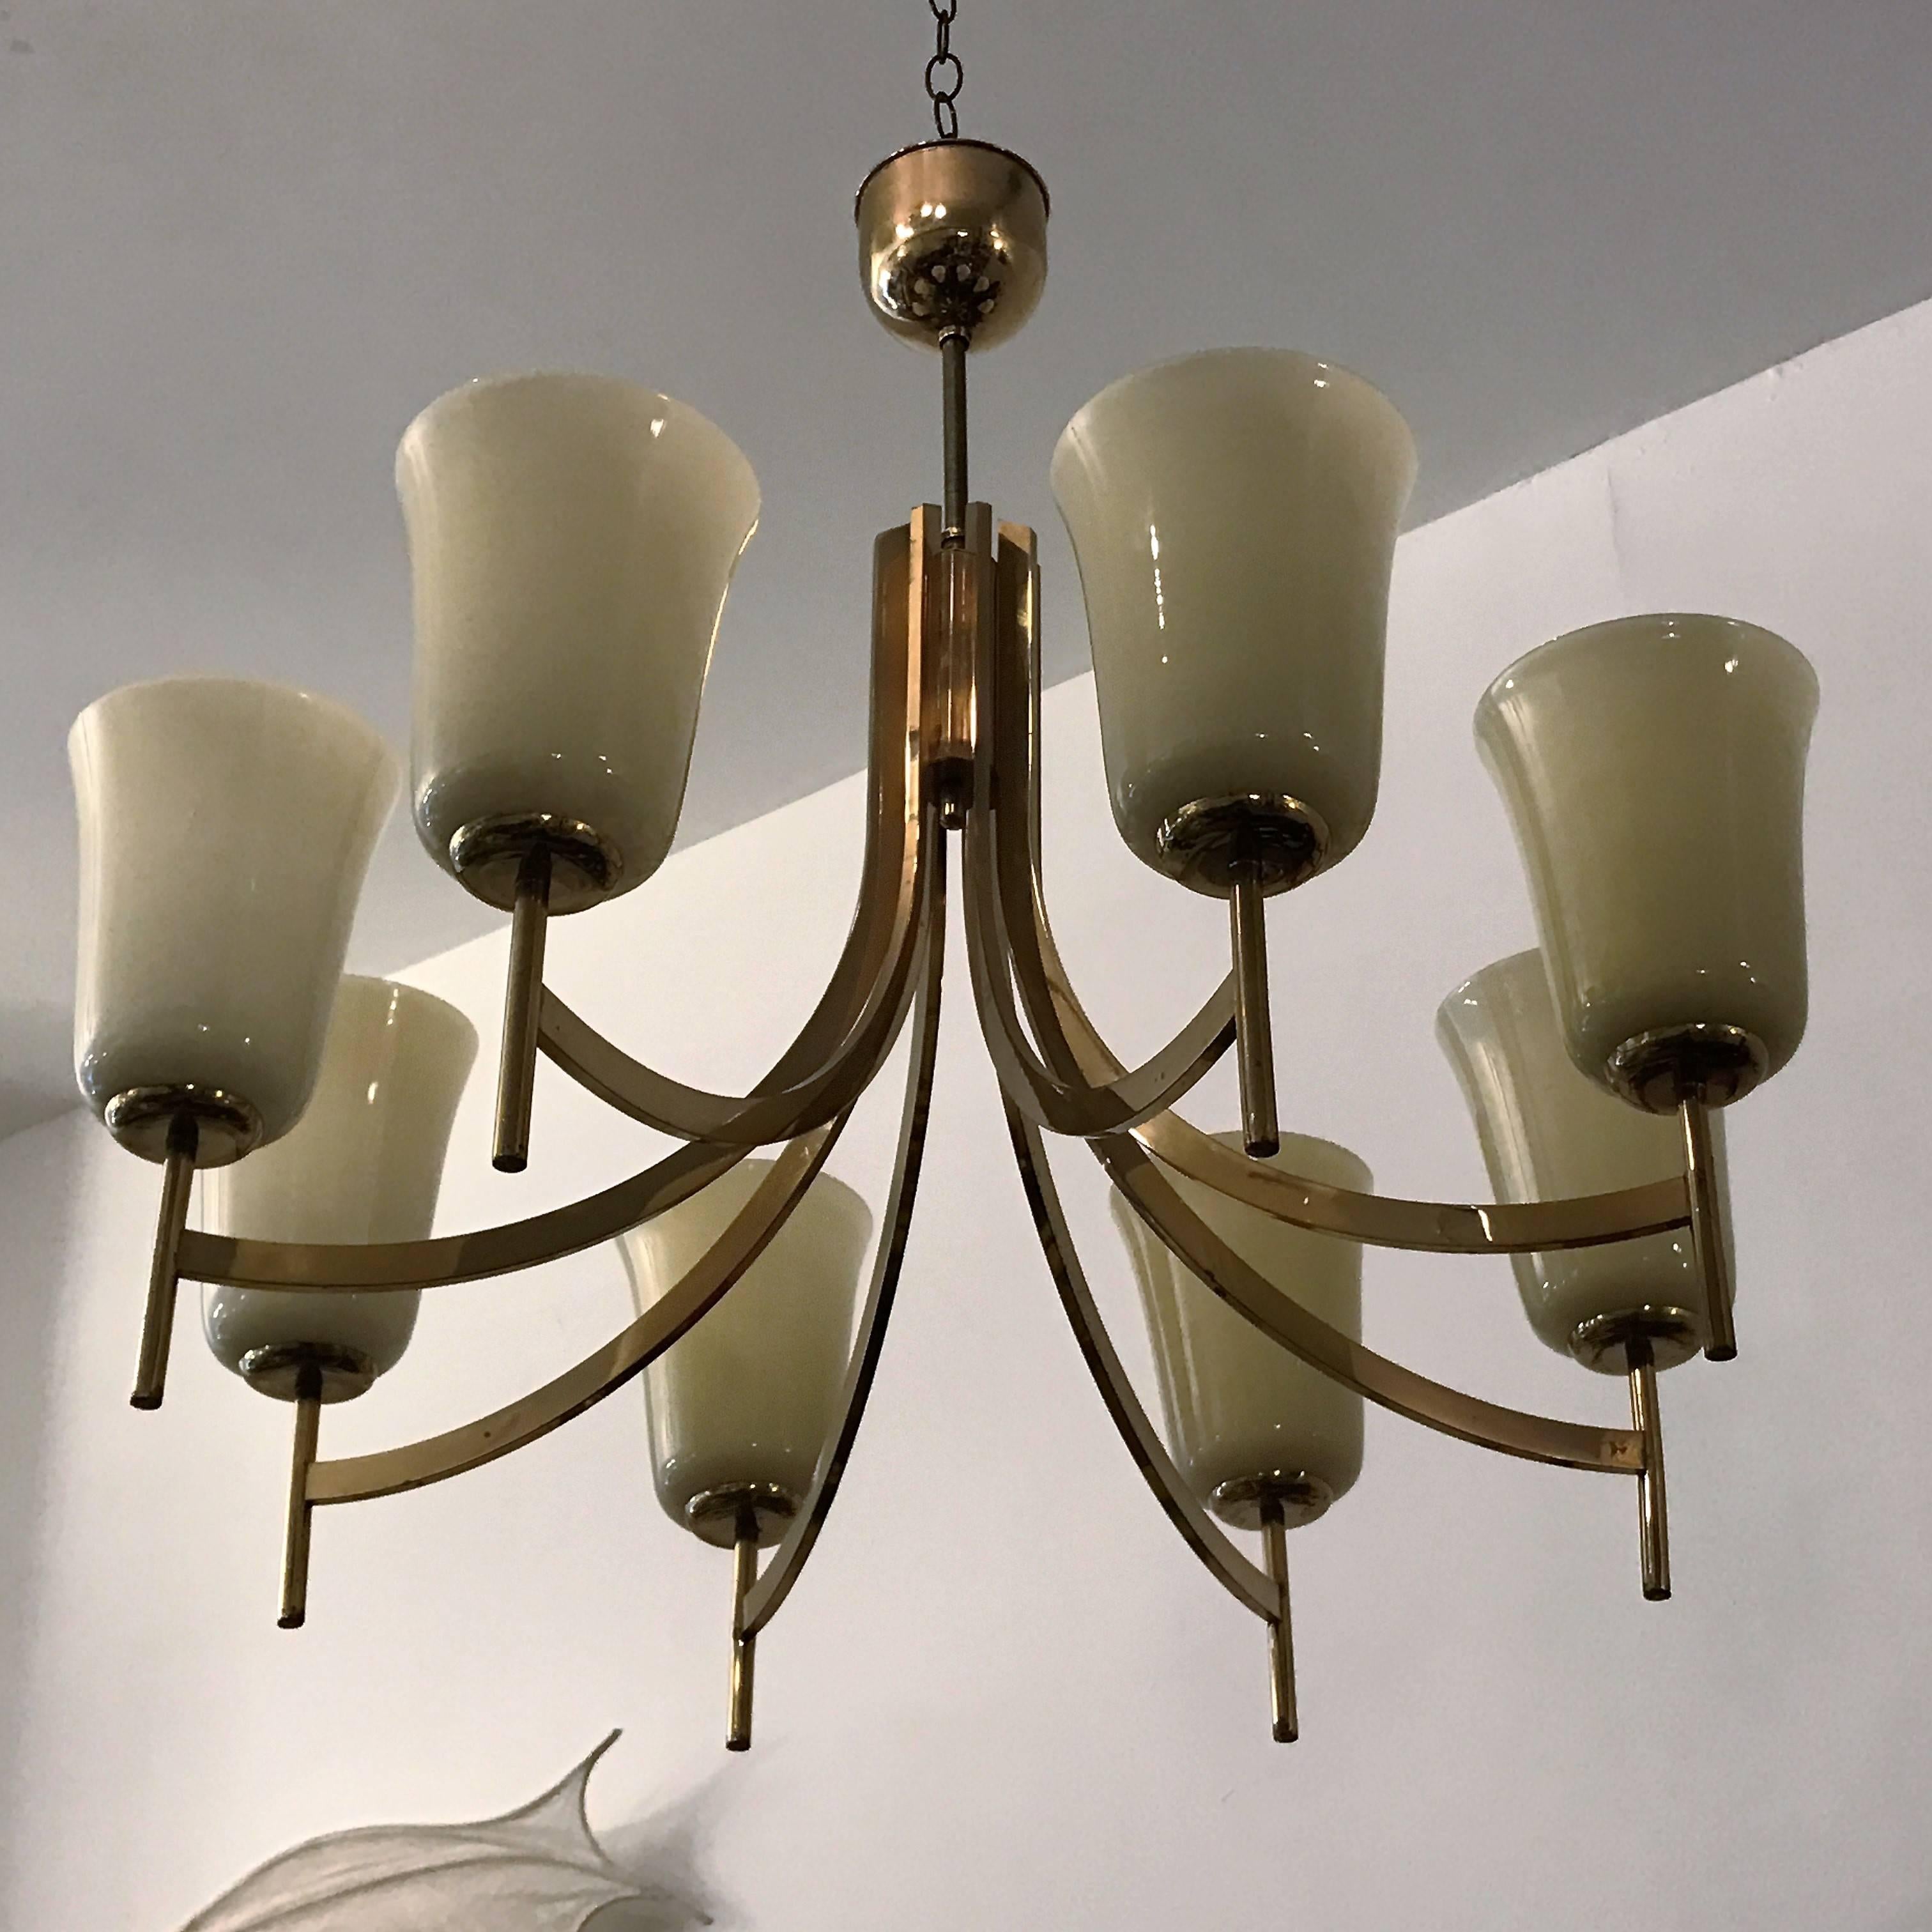 An original 1950s Swedish chandelier composed of an aged polished brass swooping frame and large custard glass shades. Newly rewired.